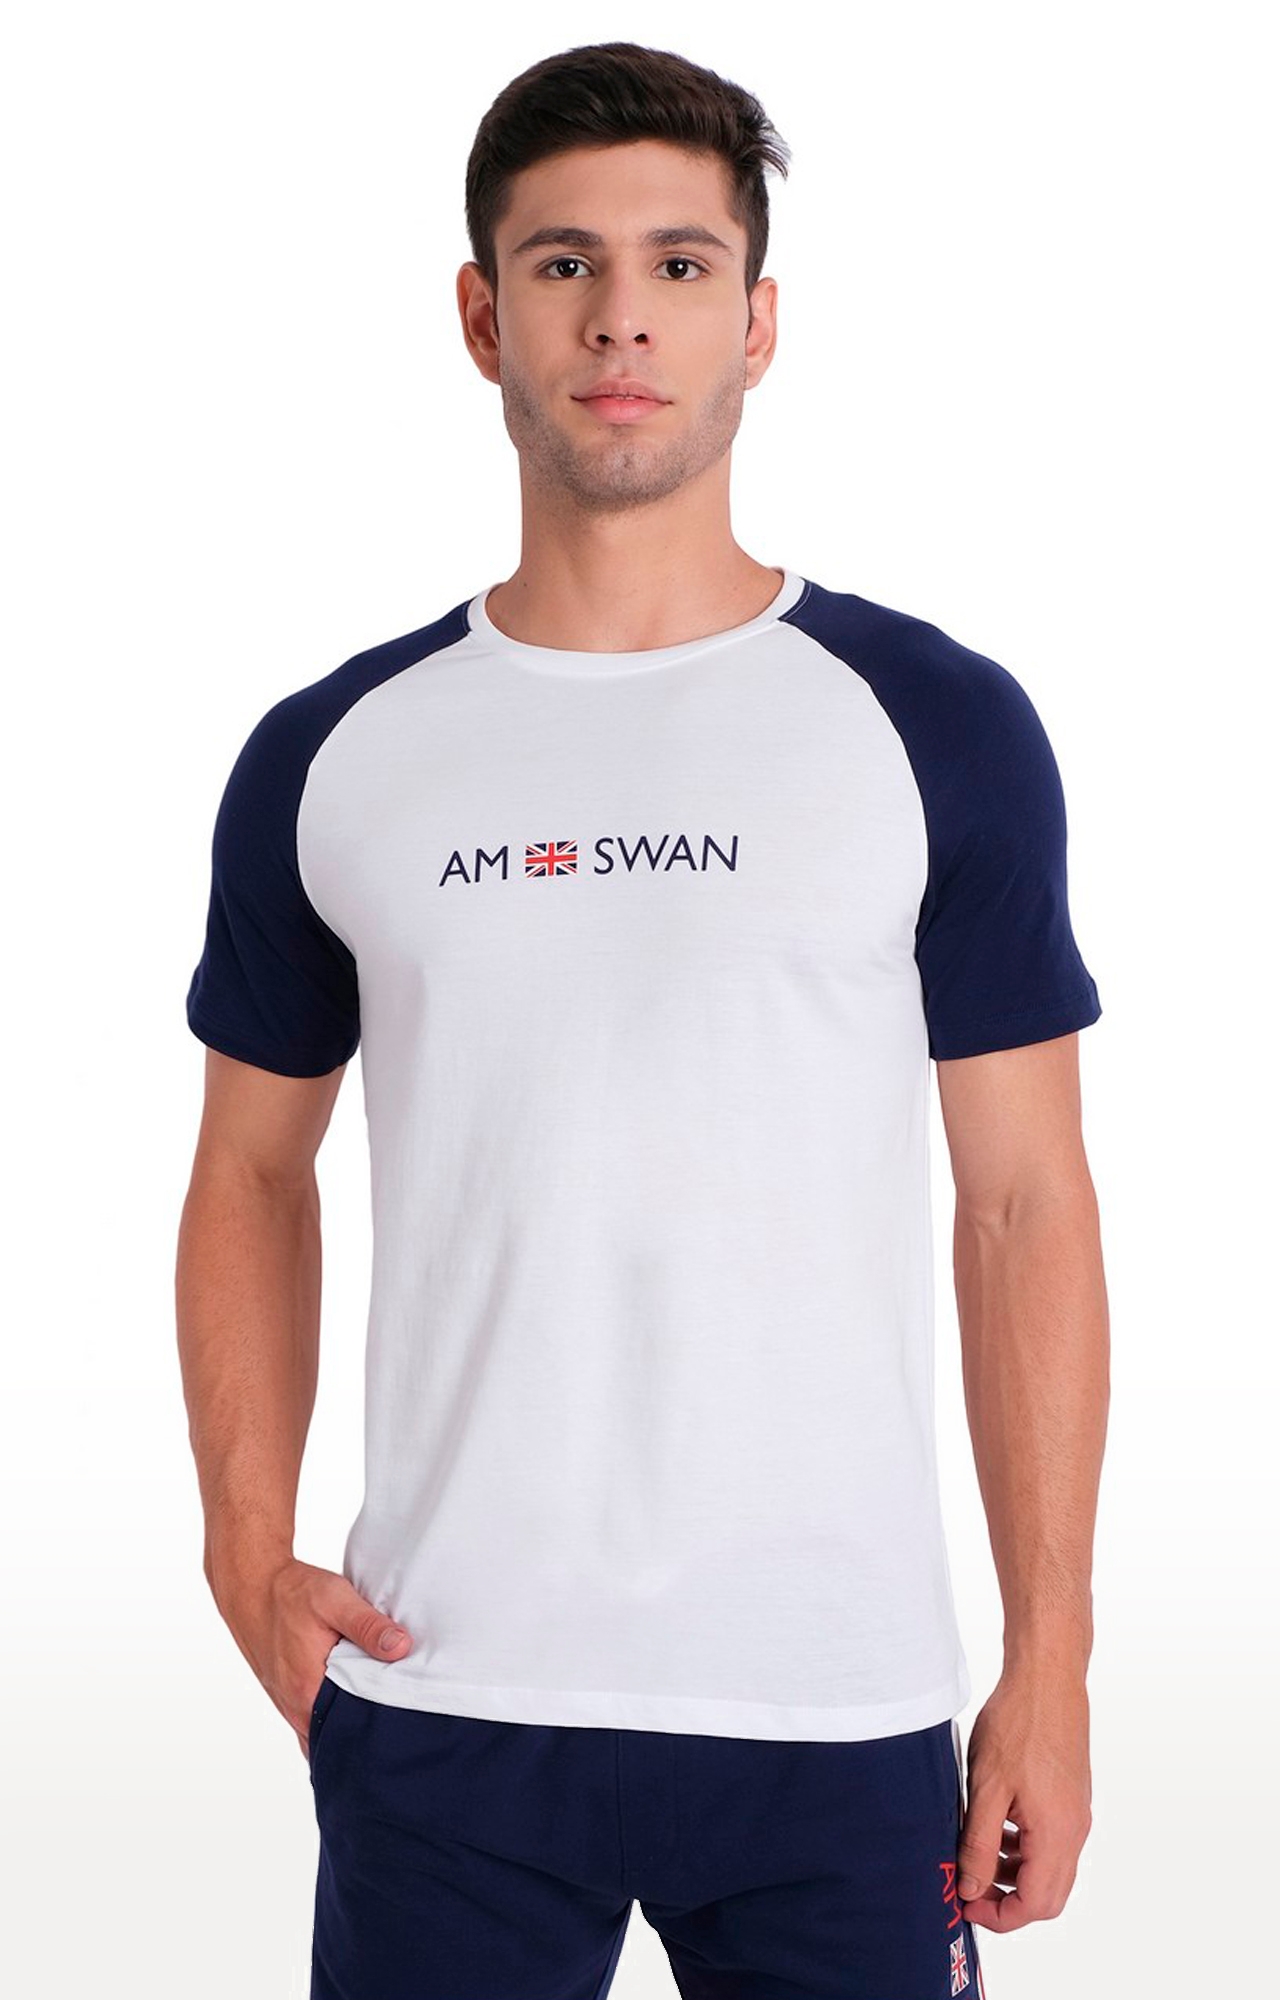 Am Swan | Men's White and Blue Cotton Typographic Printed Regular T-Shirt